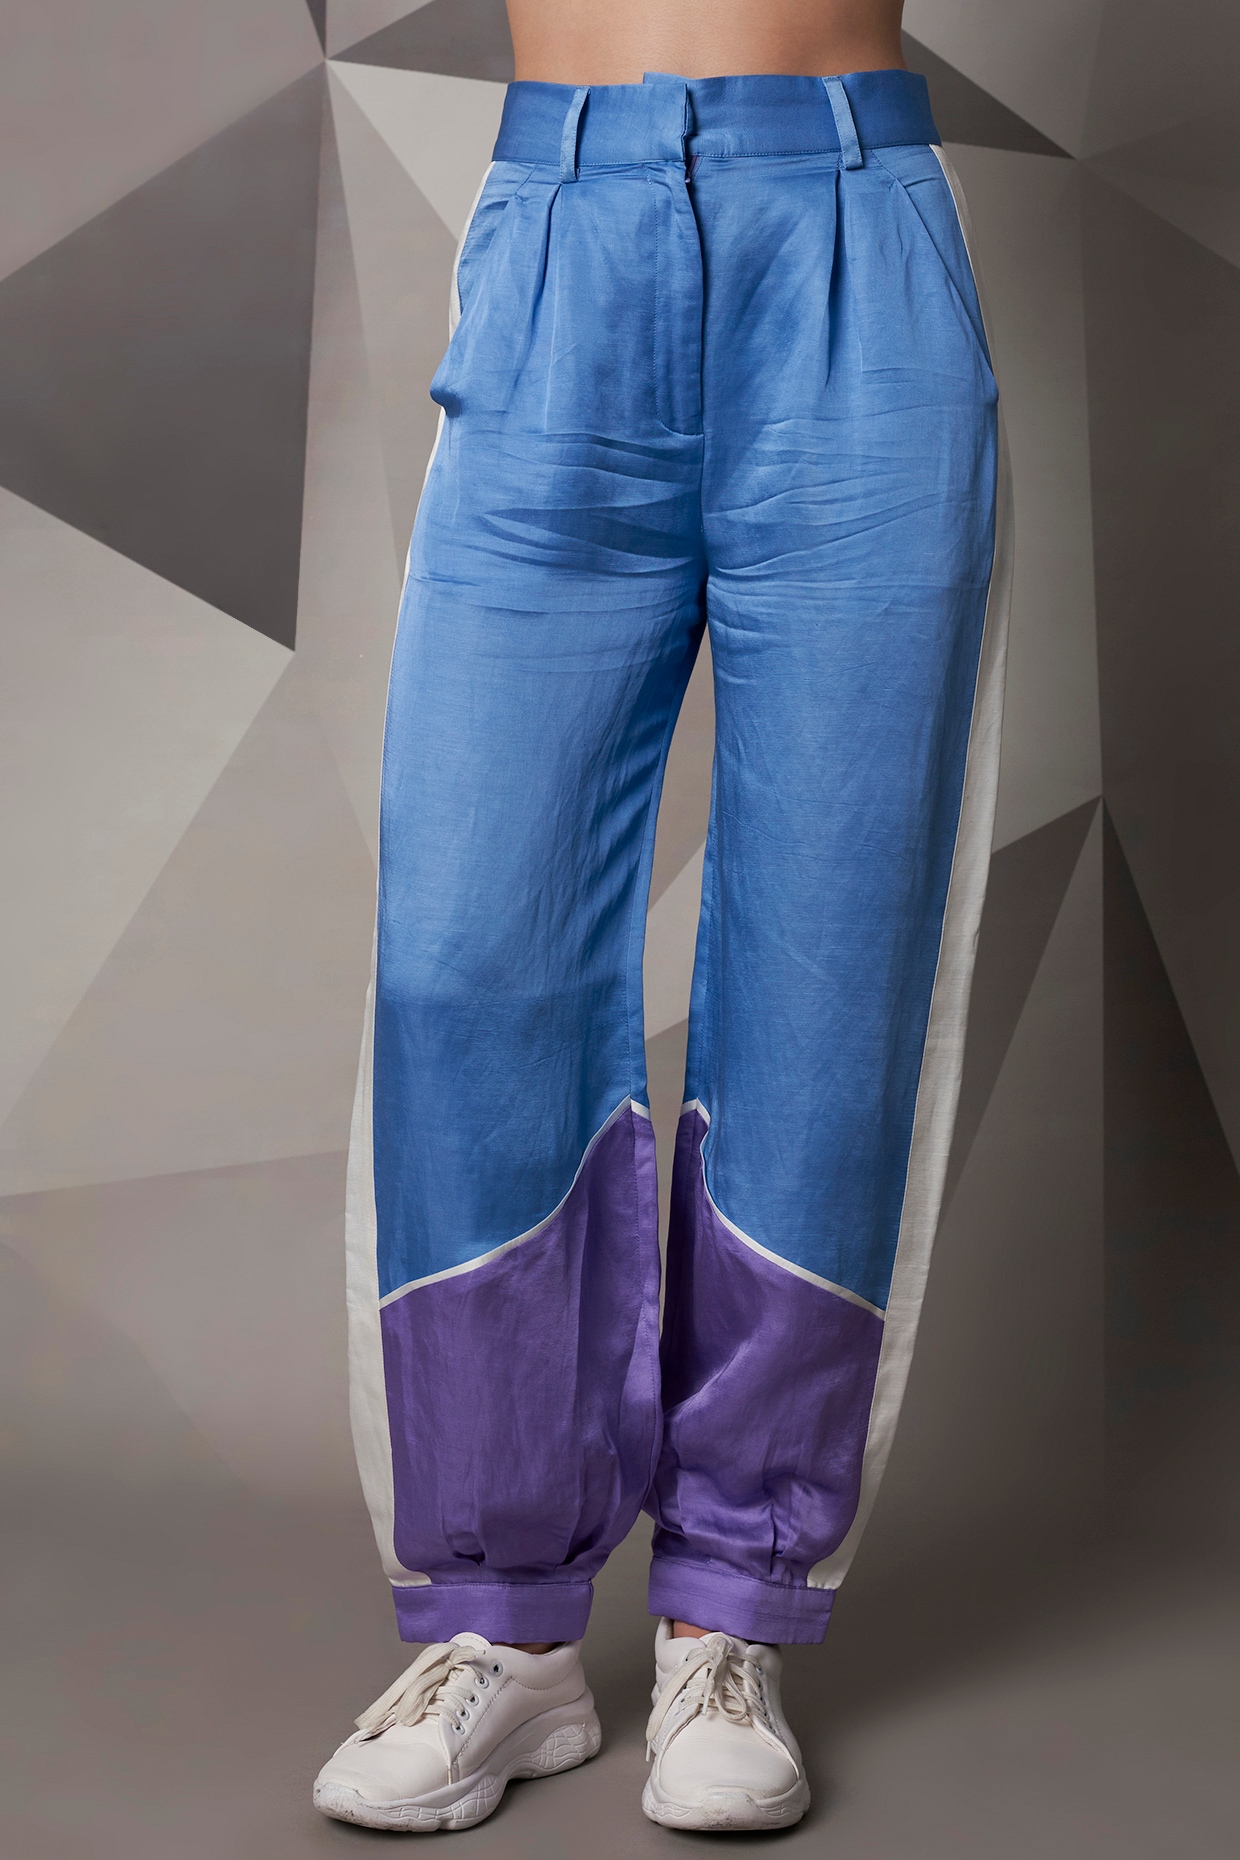 HUGO - Regular-fit flared trousers in satin with branded belt